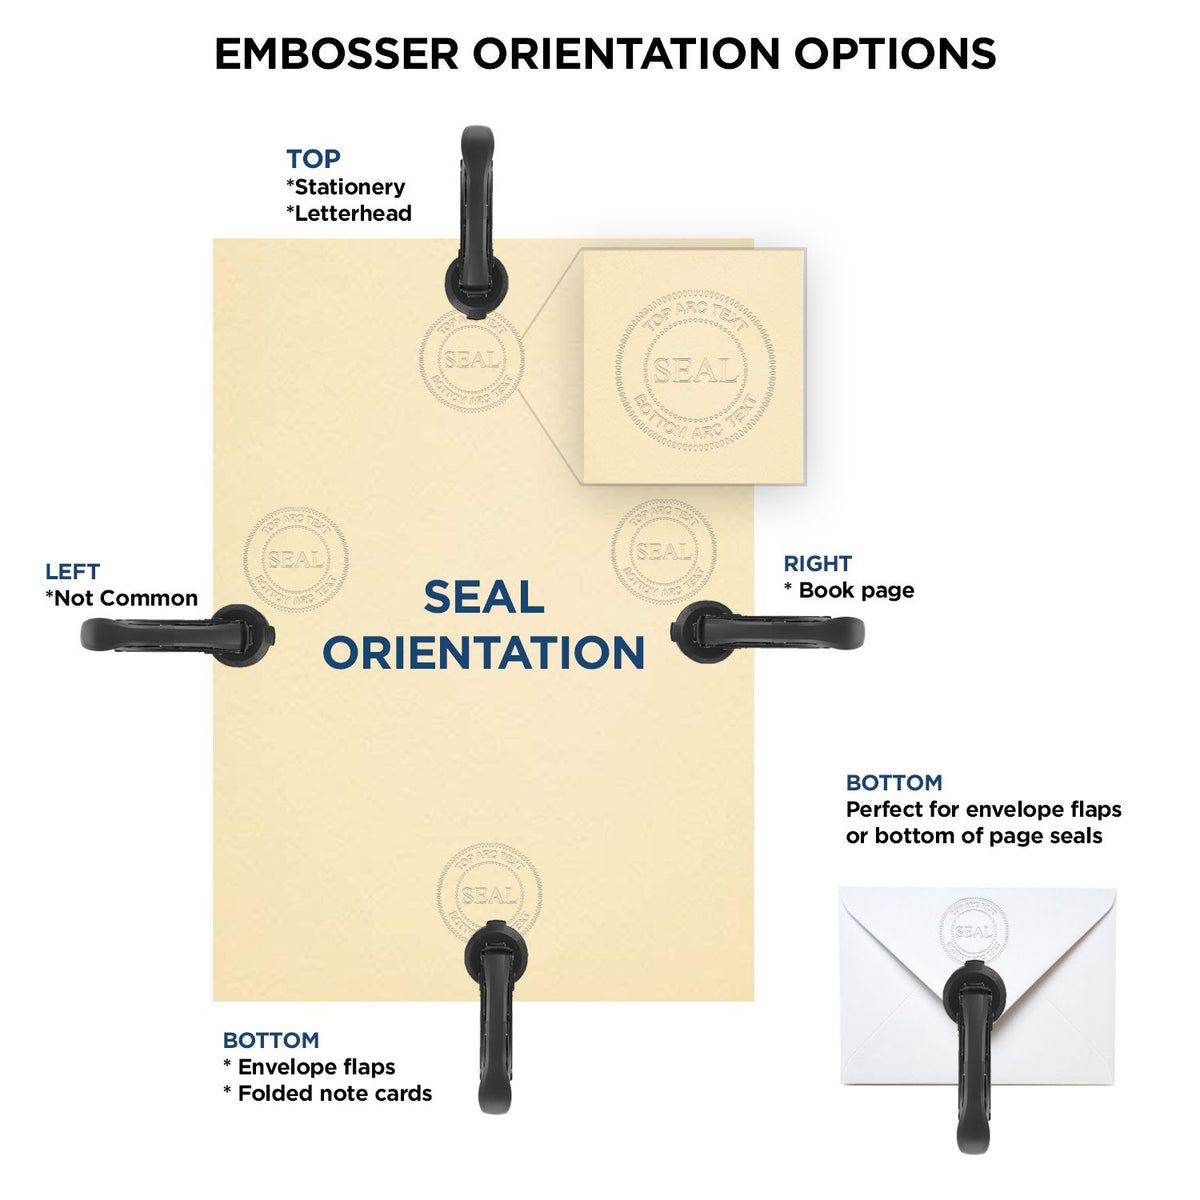 An infographic for the Hybrid Washington Land Surveyor Seal showing embosser orientation, this is showing examples of a top, bottom, right and left insert.